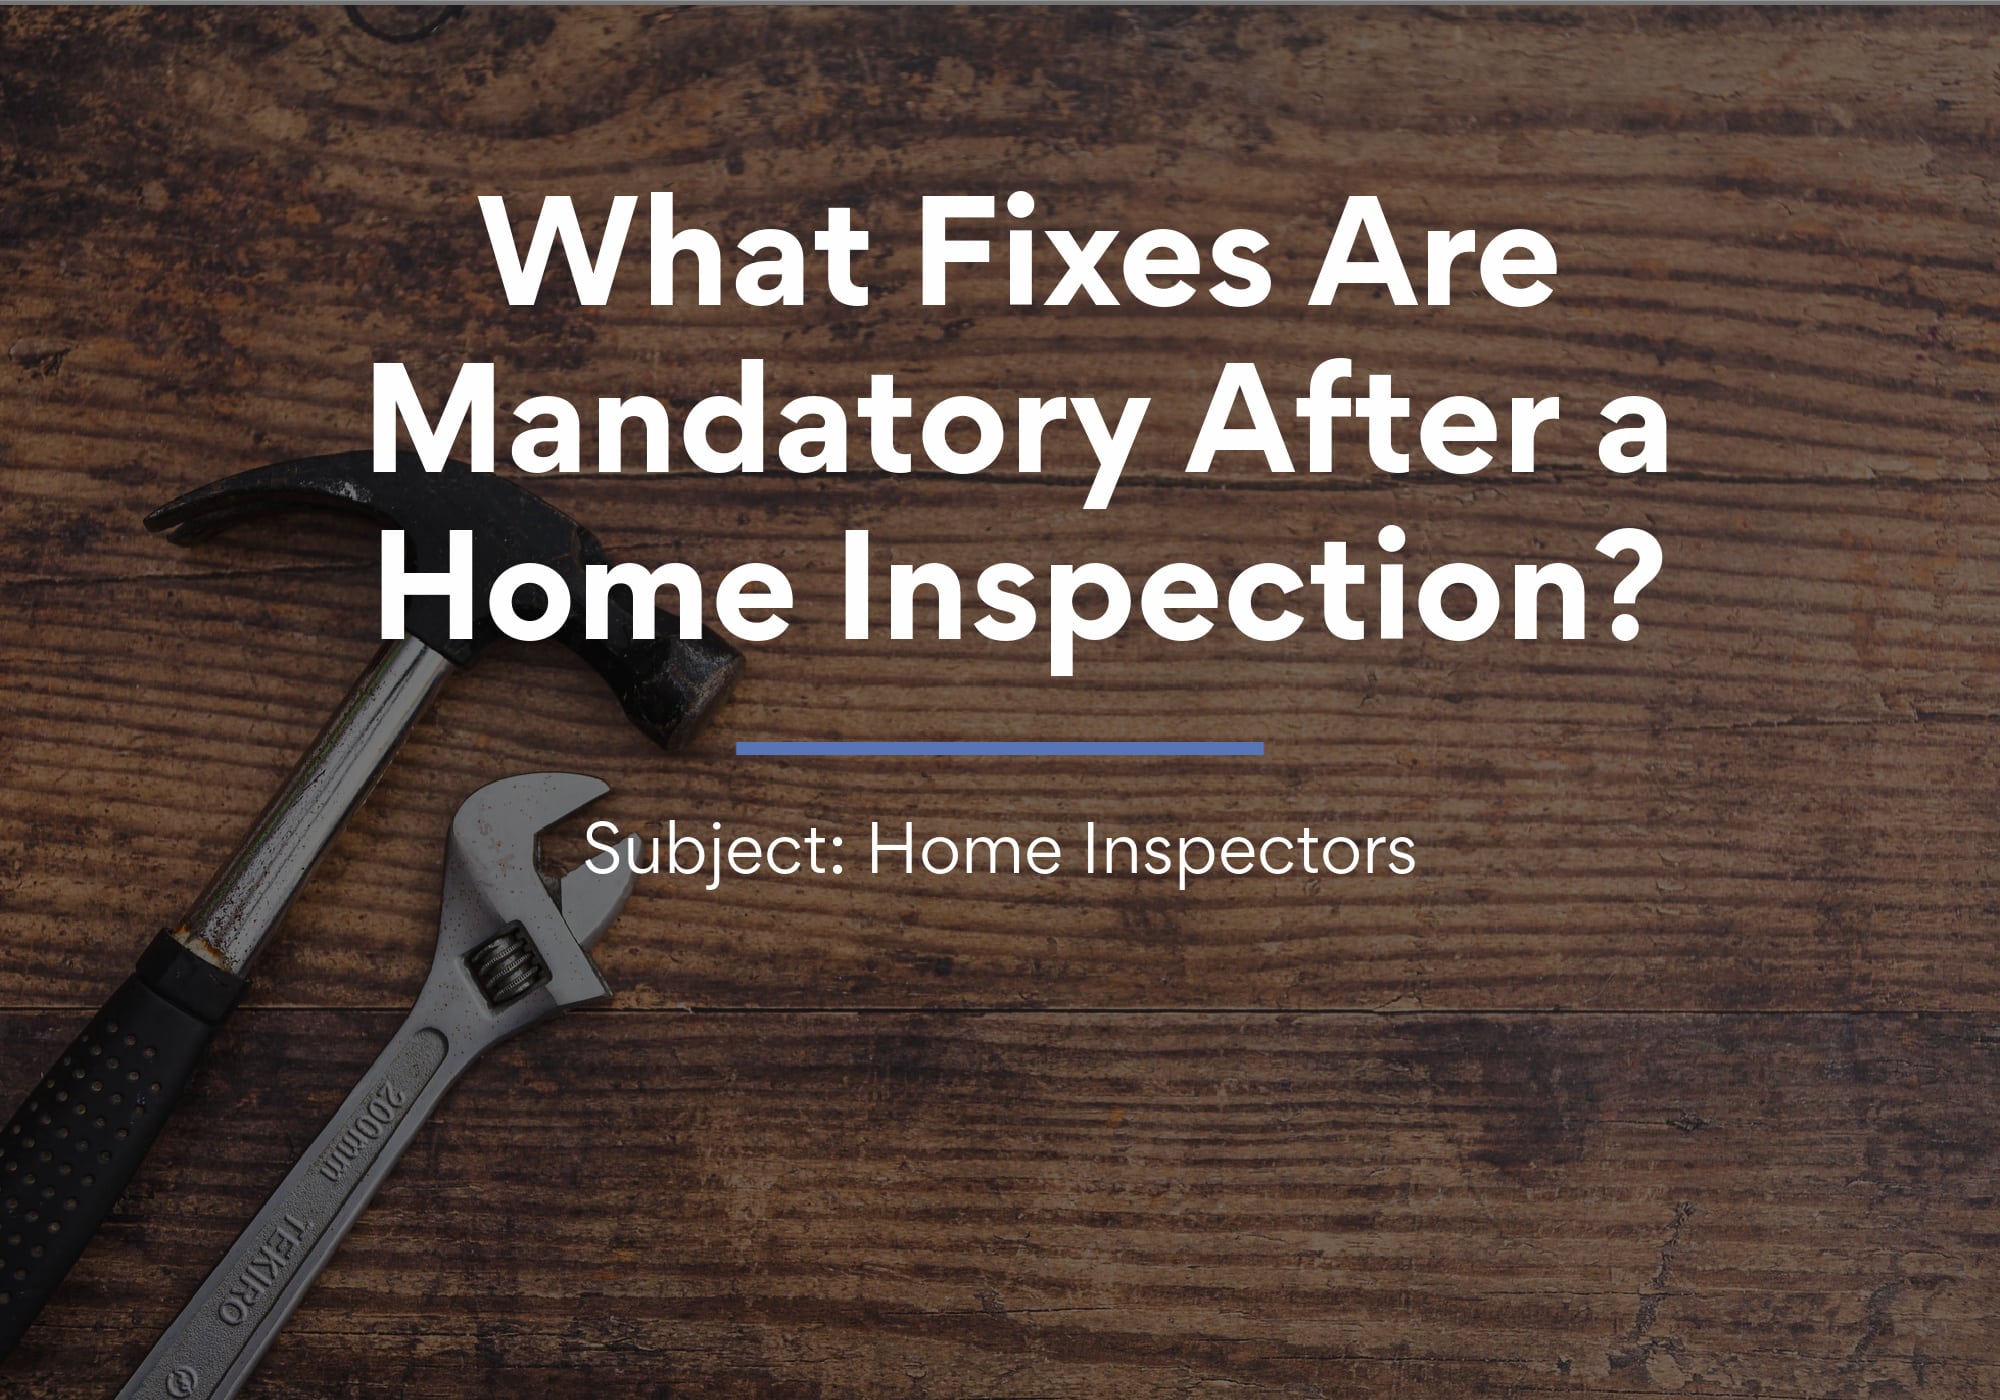 What Fixes Are Mandatory After a Home Inspection?